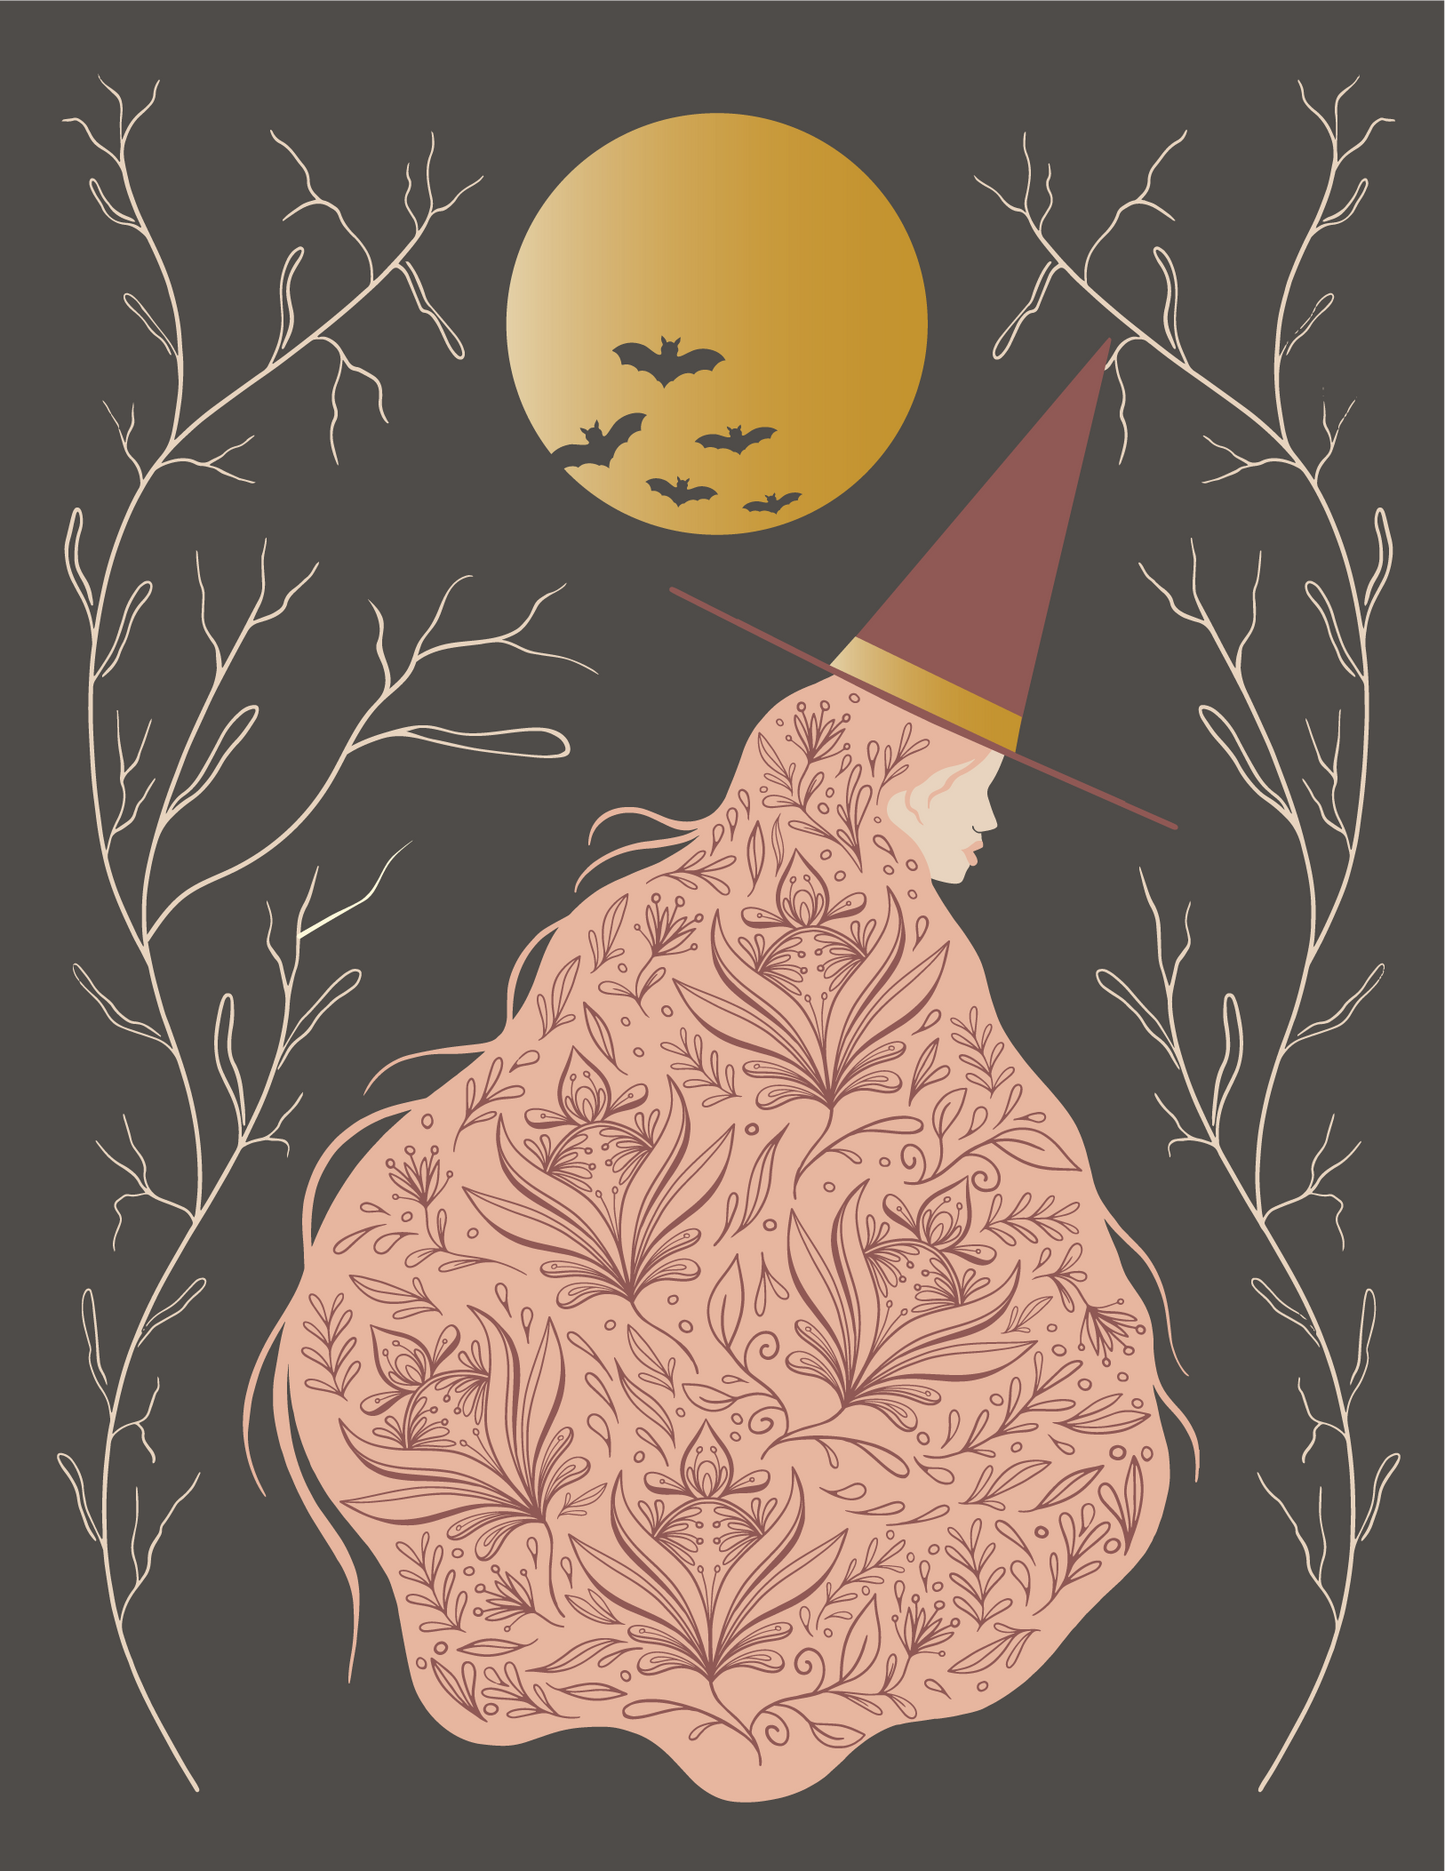 Witch's Moon Gold Foil Greeting Card